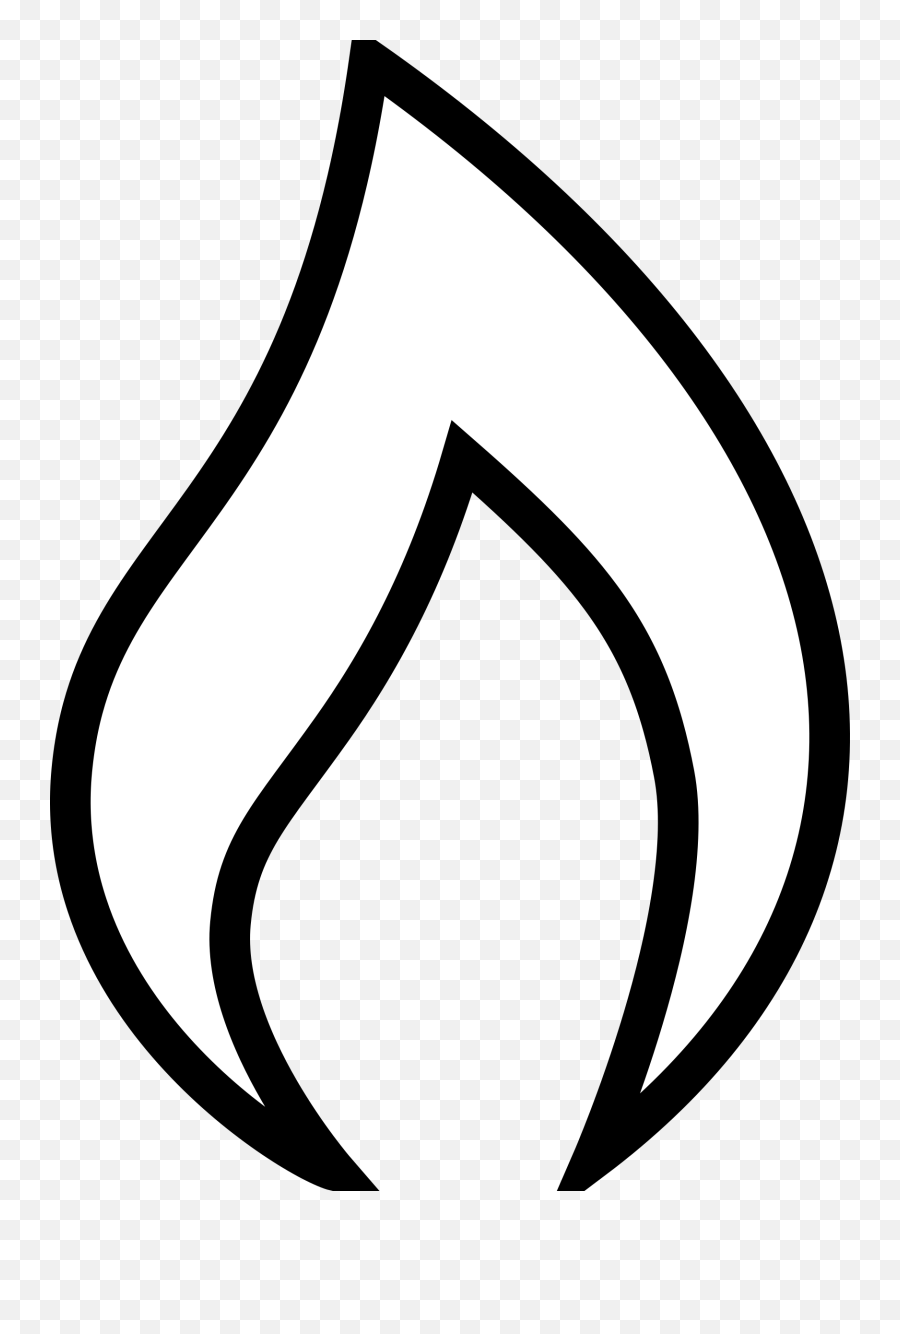 Flame - Candle Flame Clipart Black And White Emoji,Flame Clipart